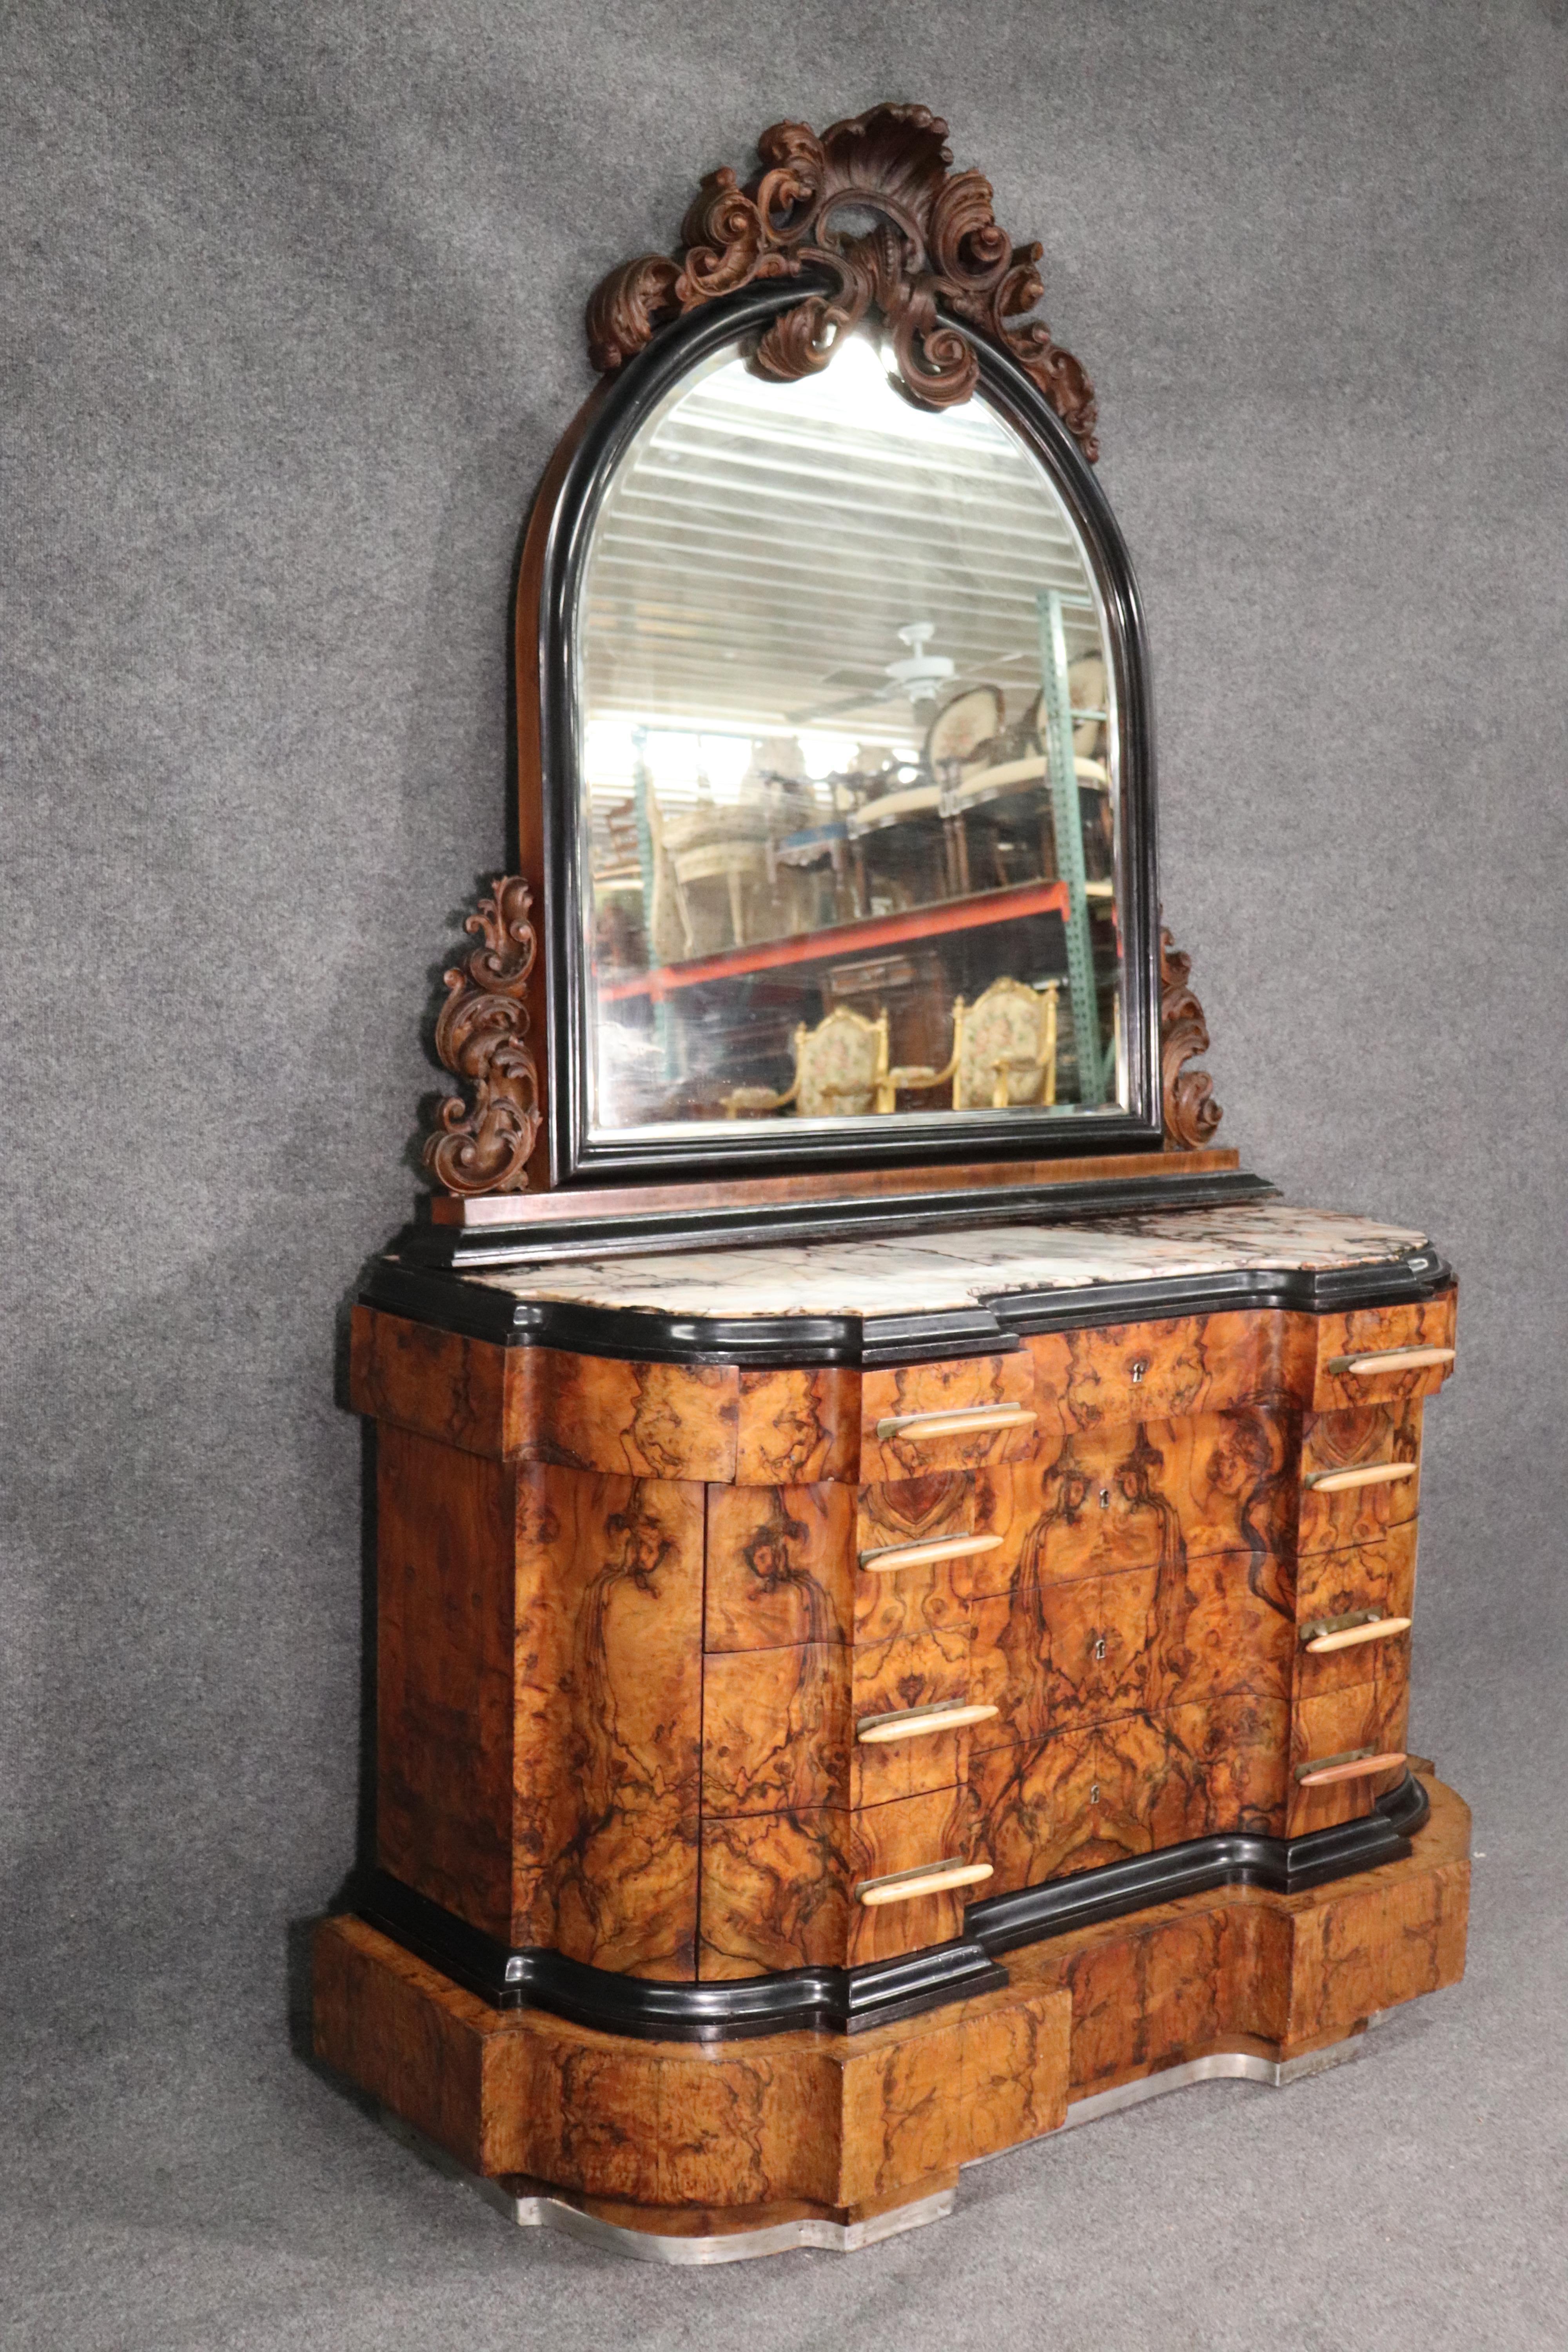 This is a fantastic dresser made during the Art Deco era of the 1920s and features a fantastic circassian walnut case and varigated marble top. The top was professionally repaired at one point in its life and is not noticeable. The mirrored top is